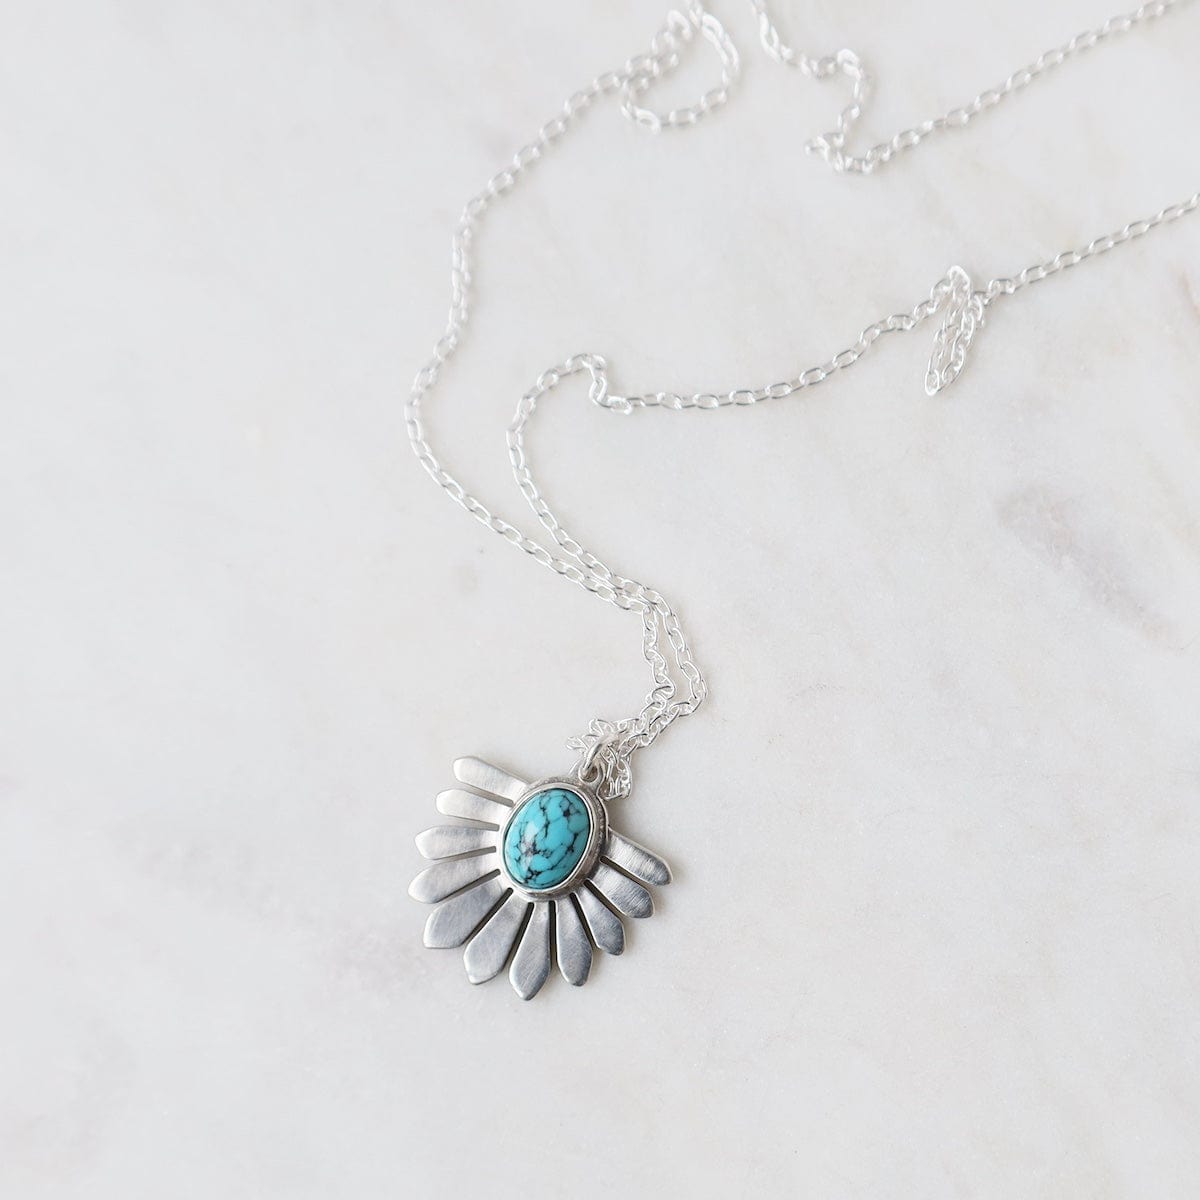 NKL Turquoise Sofi Necklace Silver